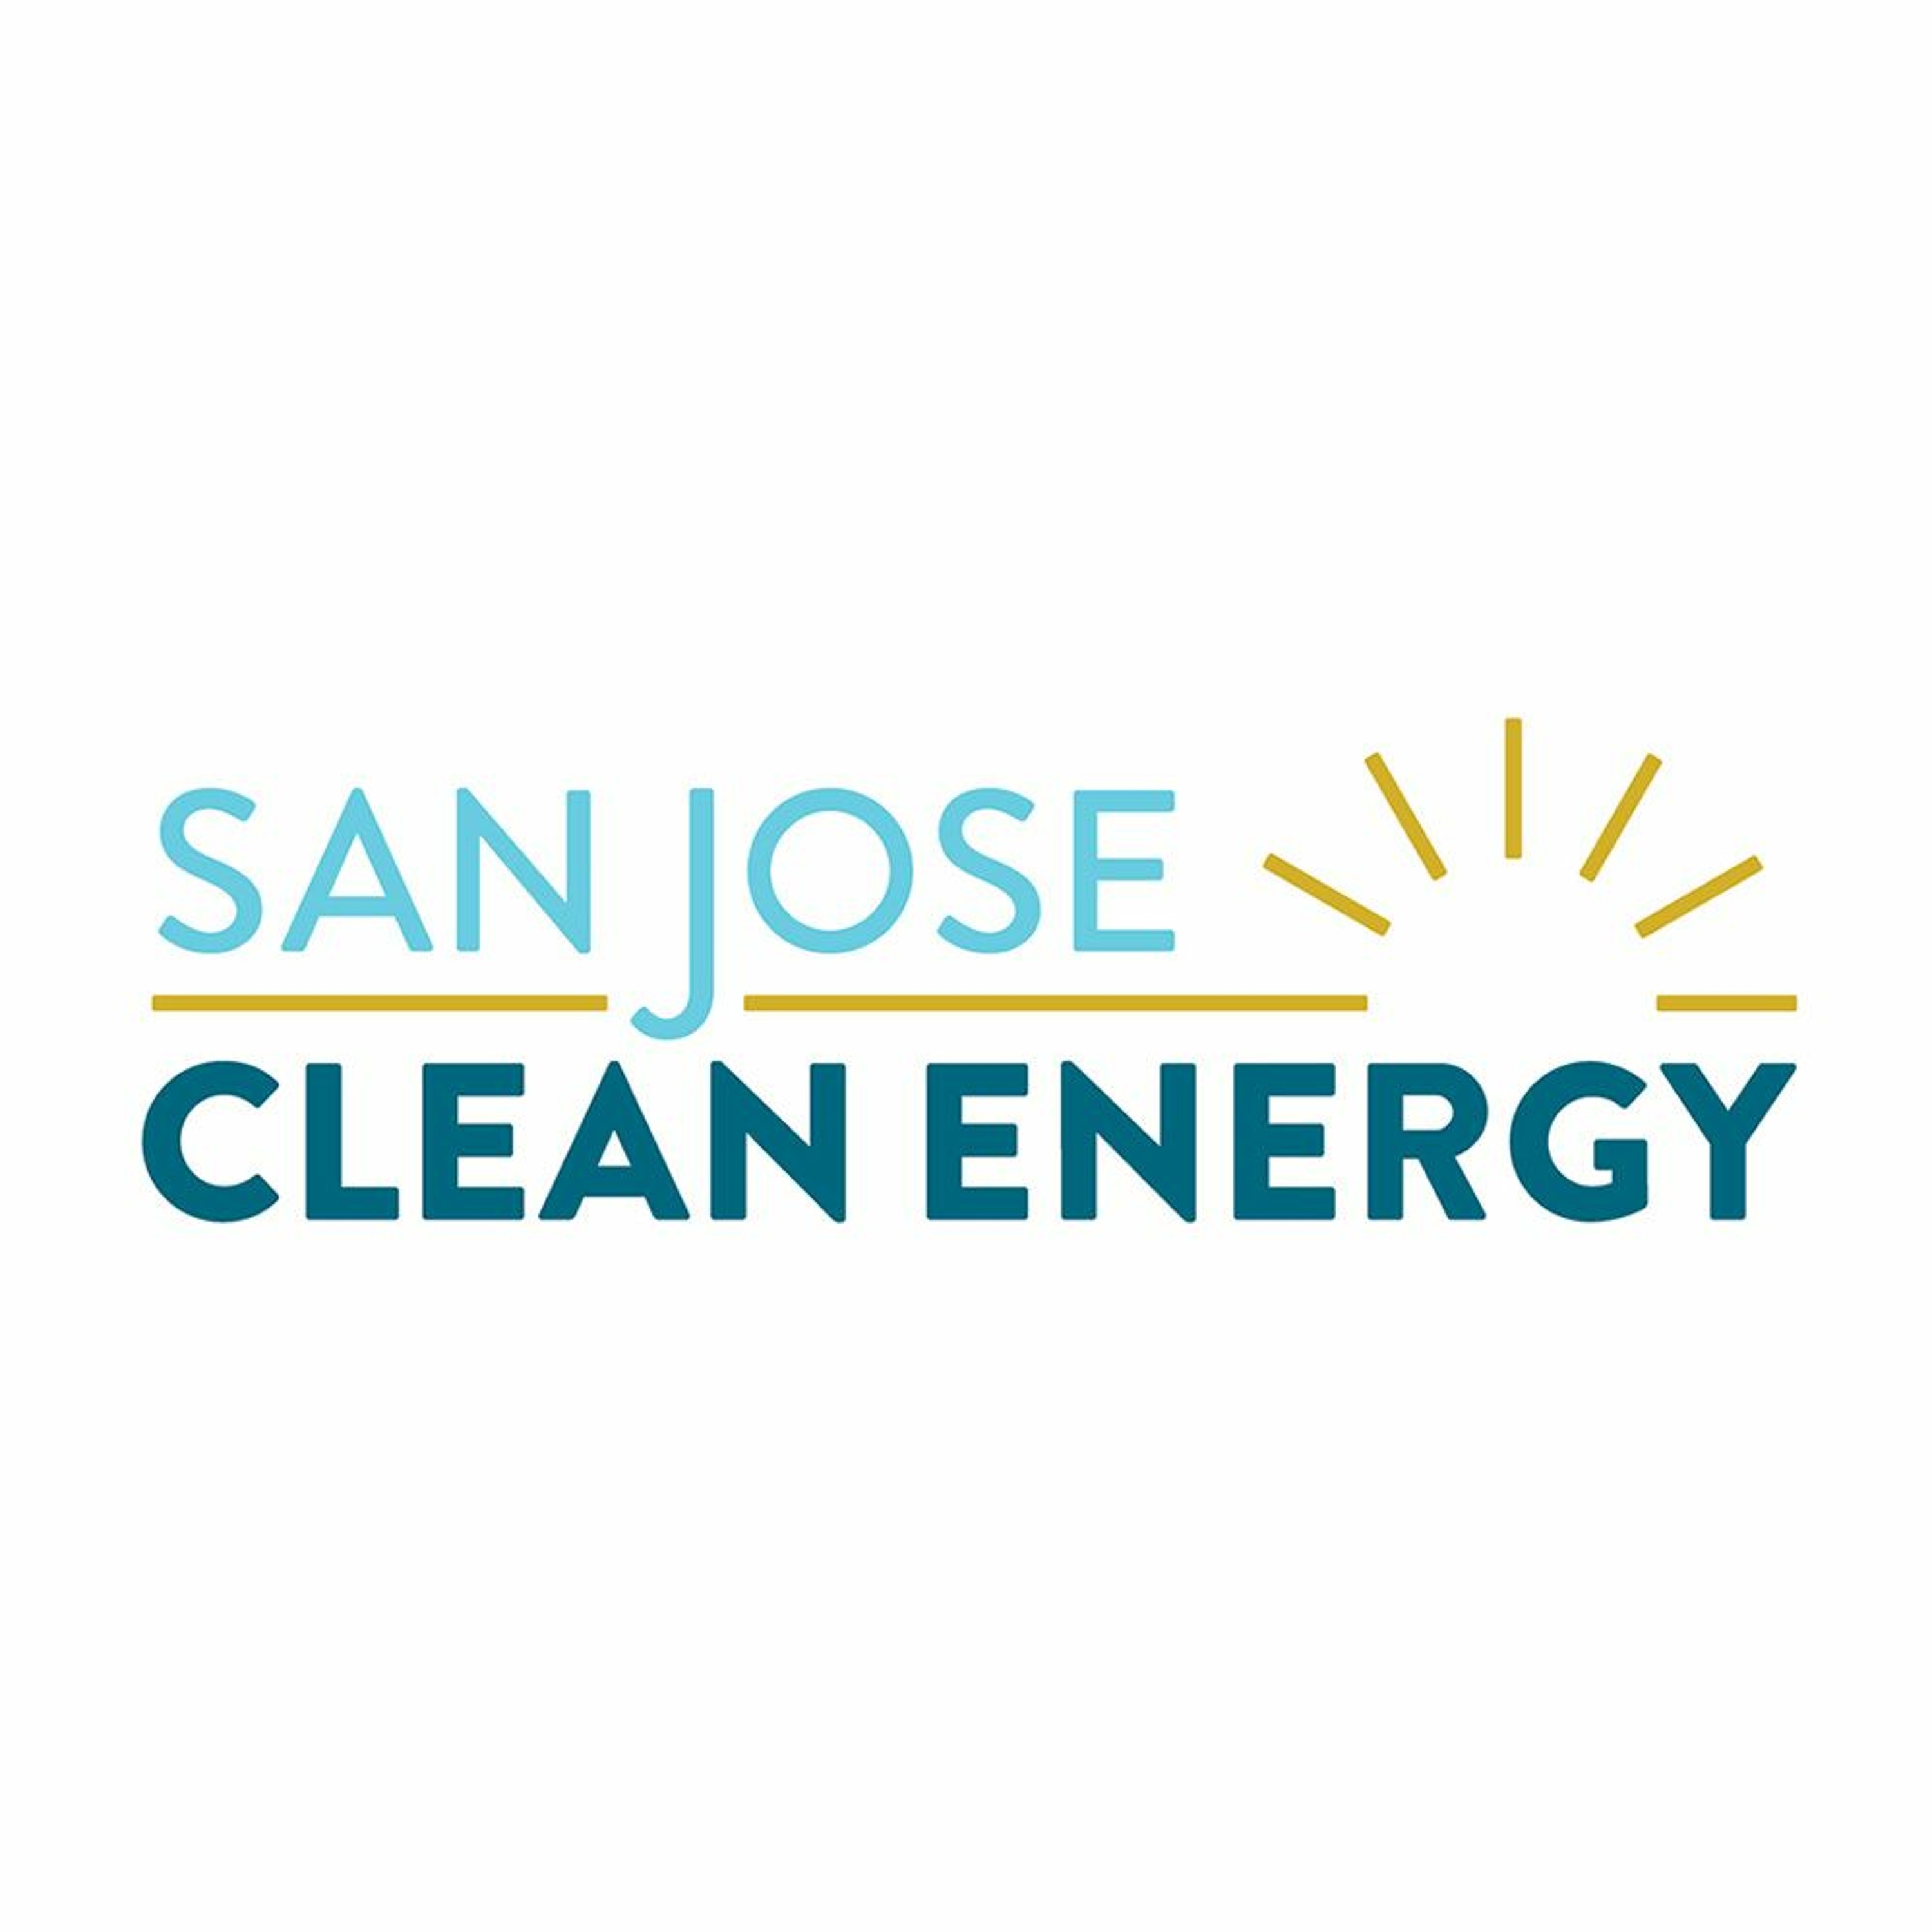 San Jose Clean Energy - The New Electric Utility